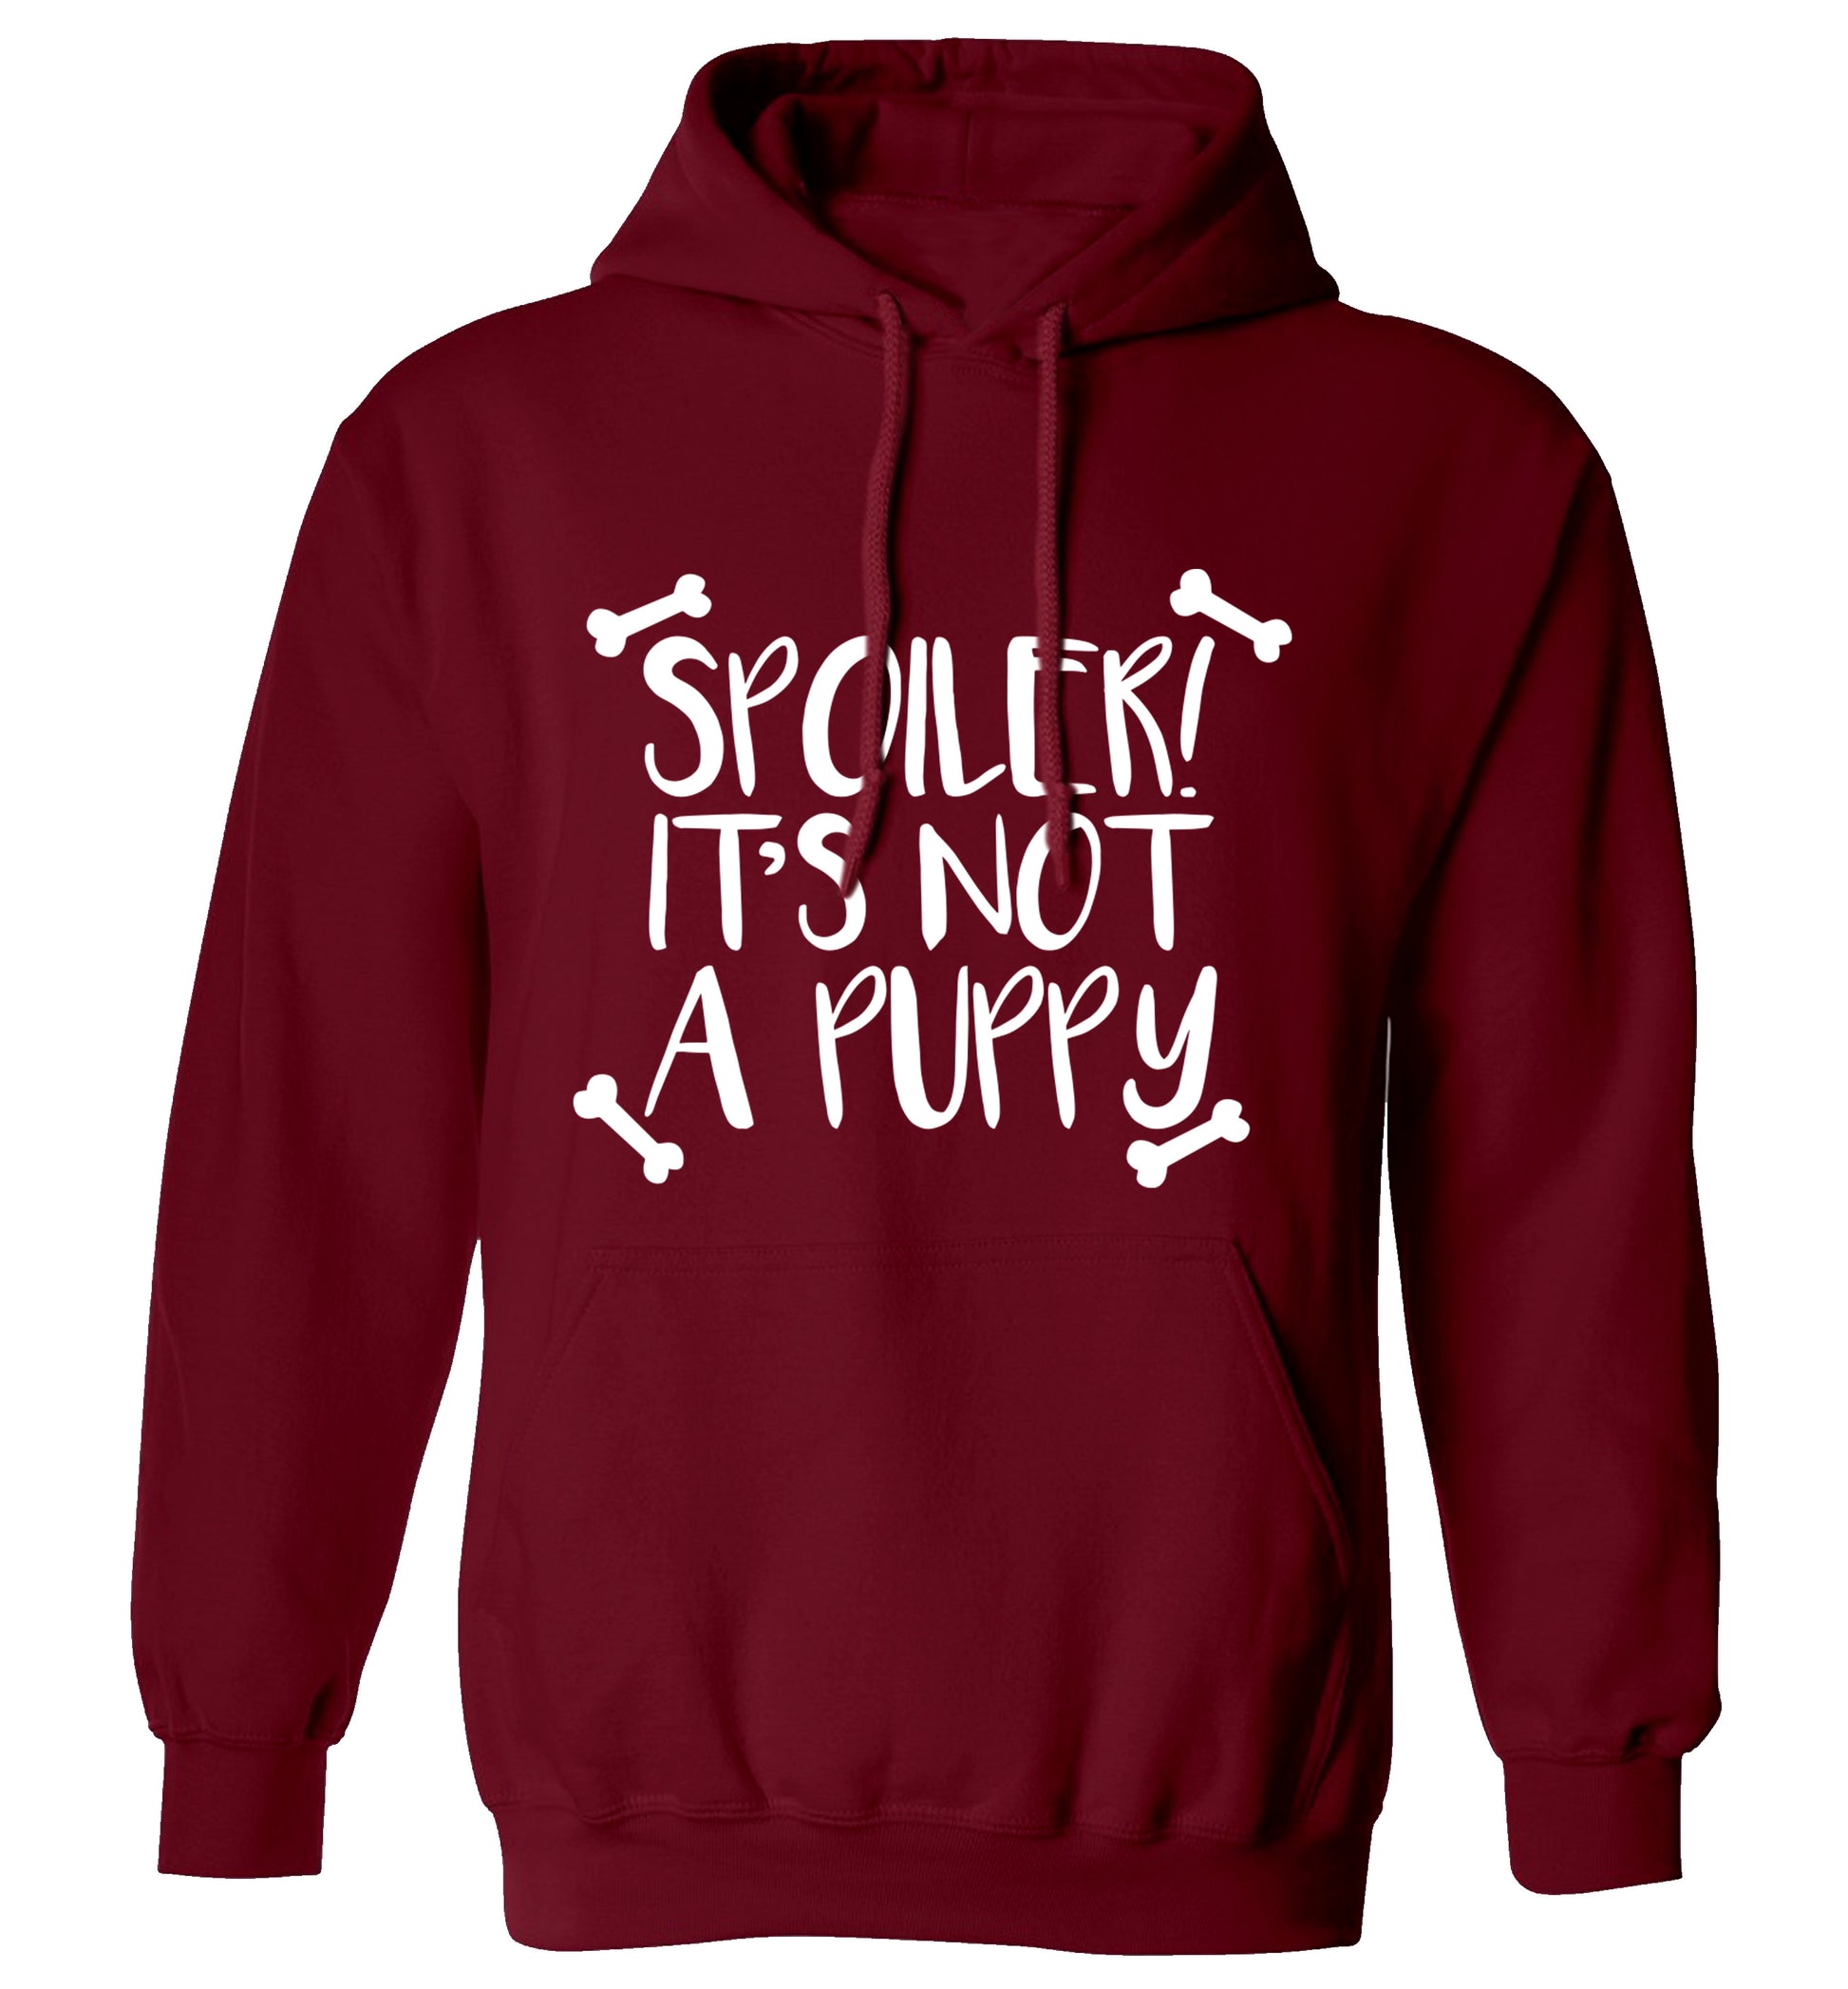 Spoiler it's not a puppy adults unisex maroon hoodie 2XL